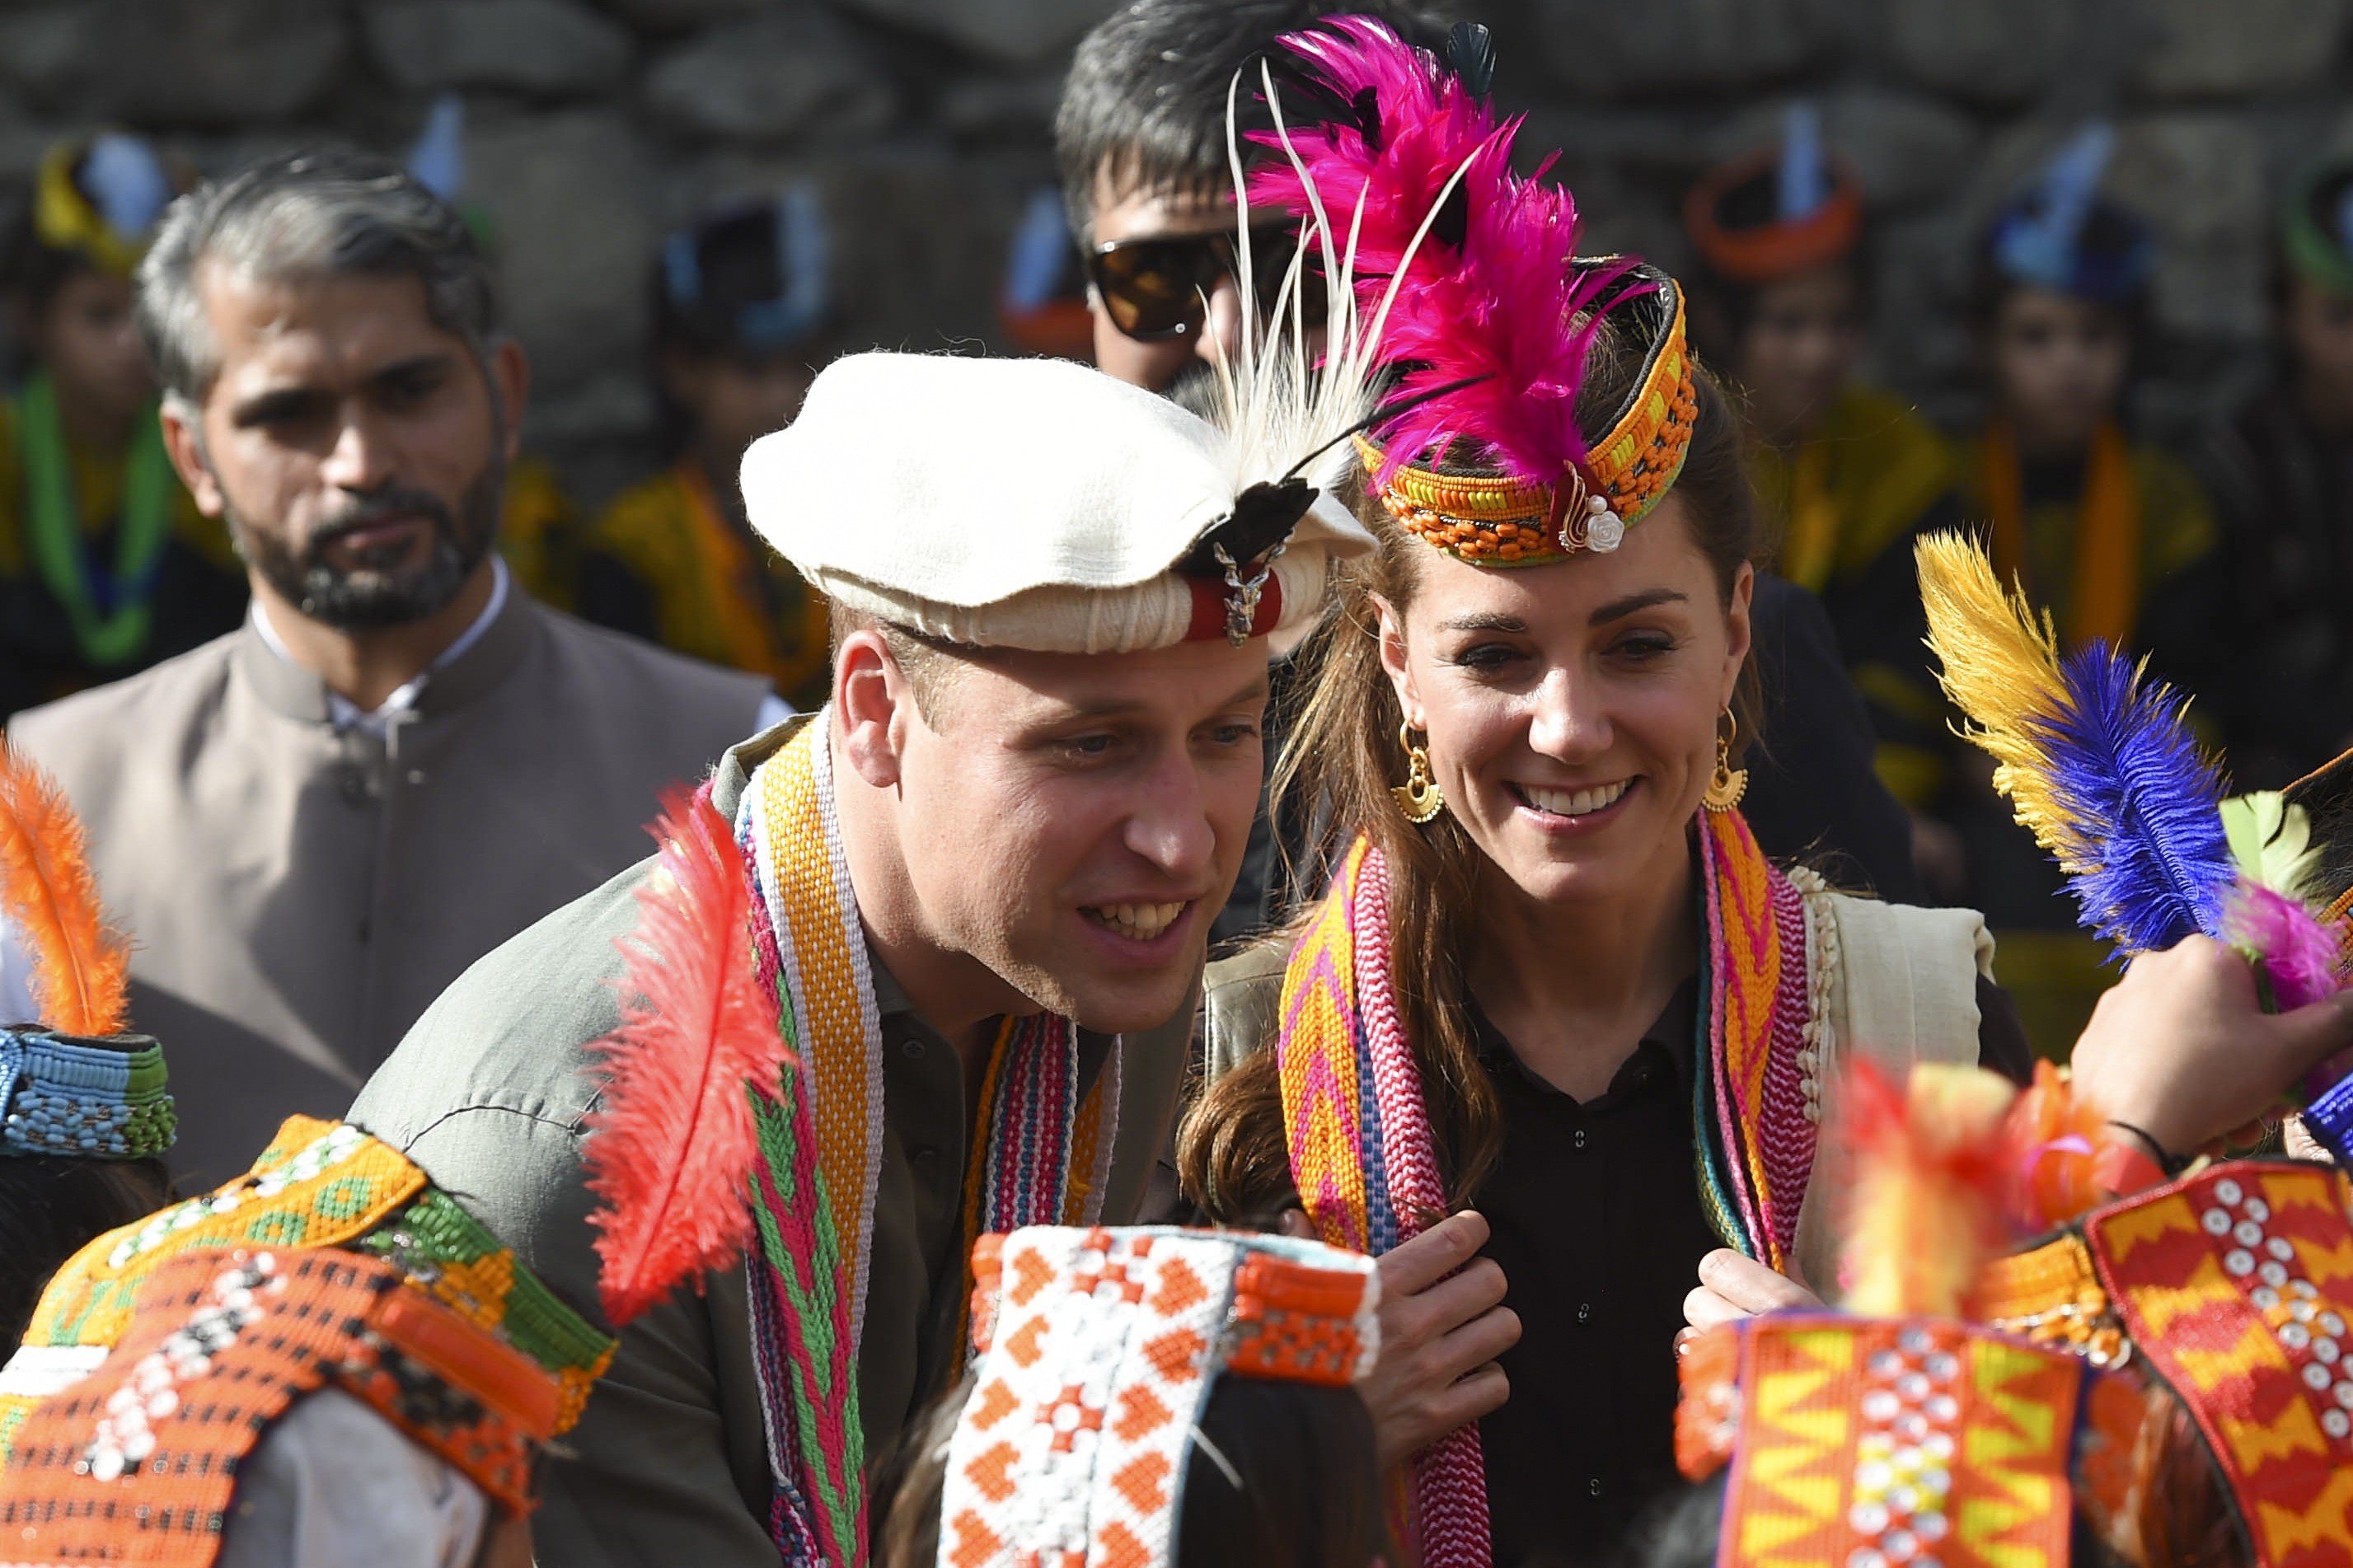 Britain's Prince William and his wife Kate Middleton visit the Bumburate Valley in Pakistan. The pair have been praised for cultural sensitivity in their choice of attire. Photo: AFP